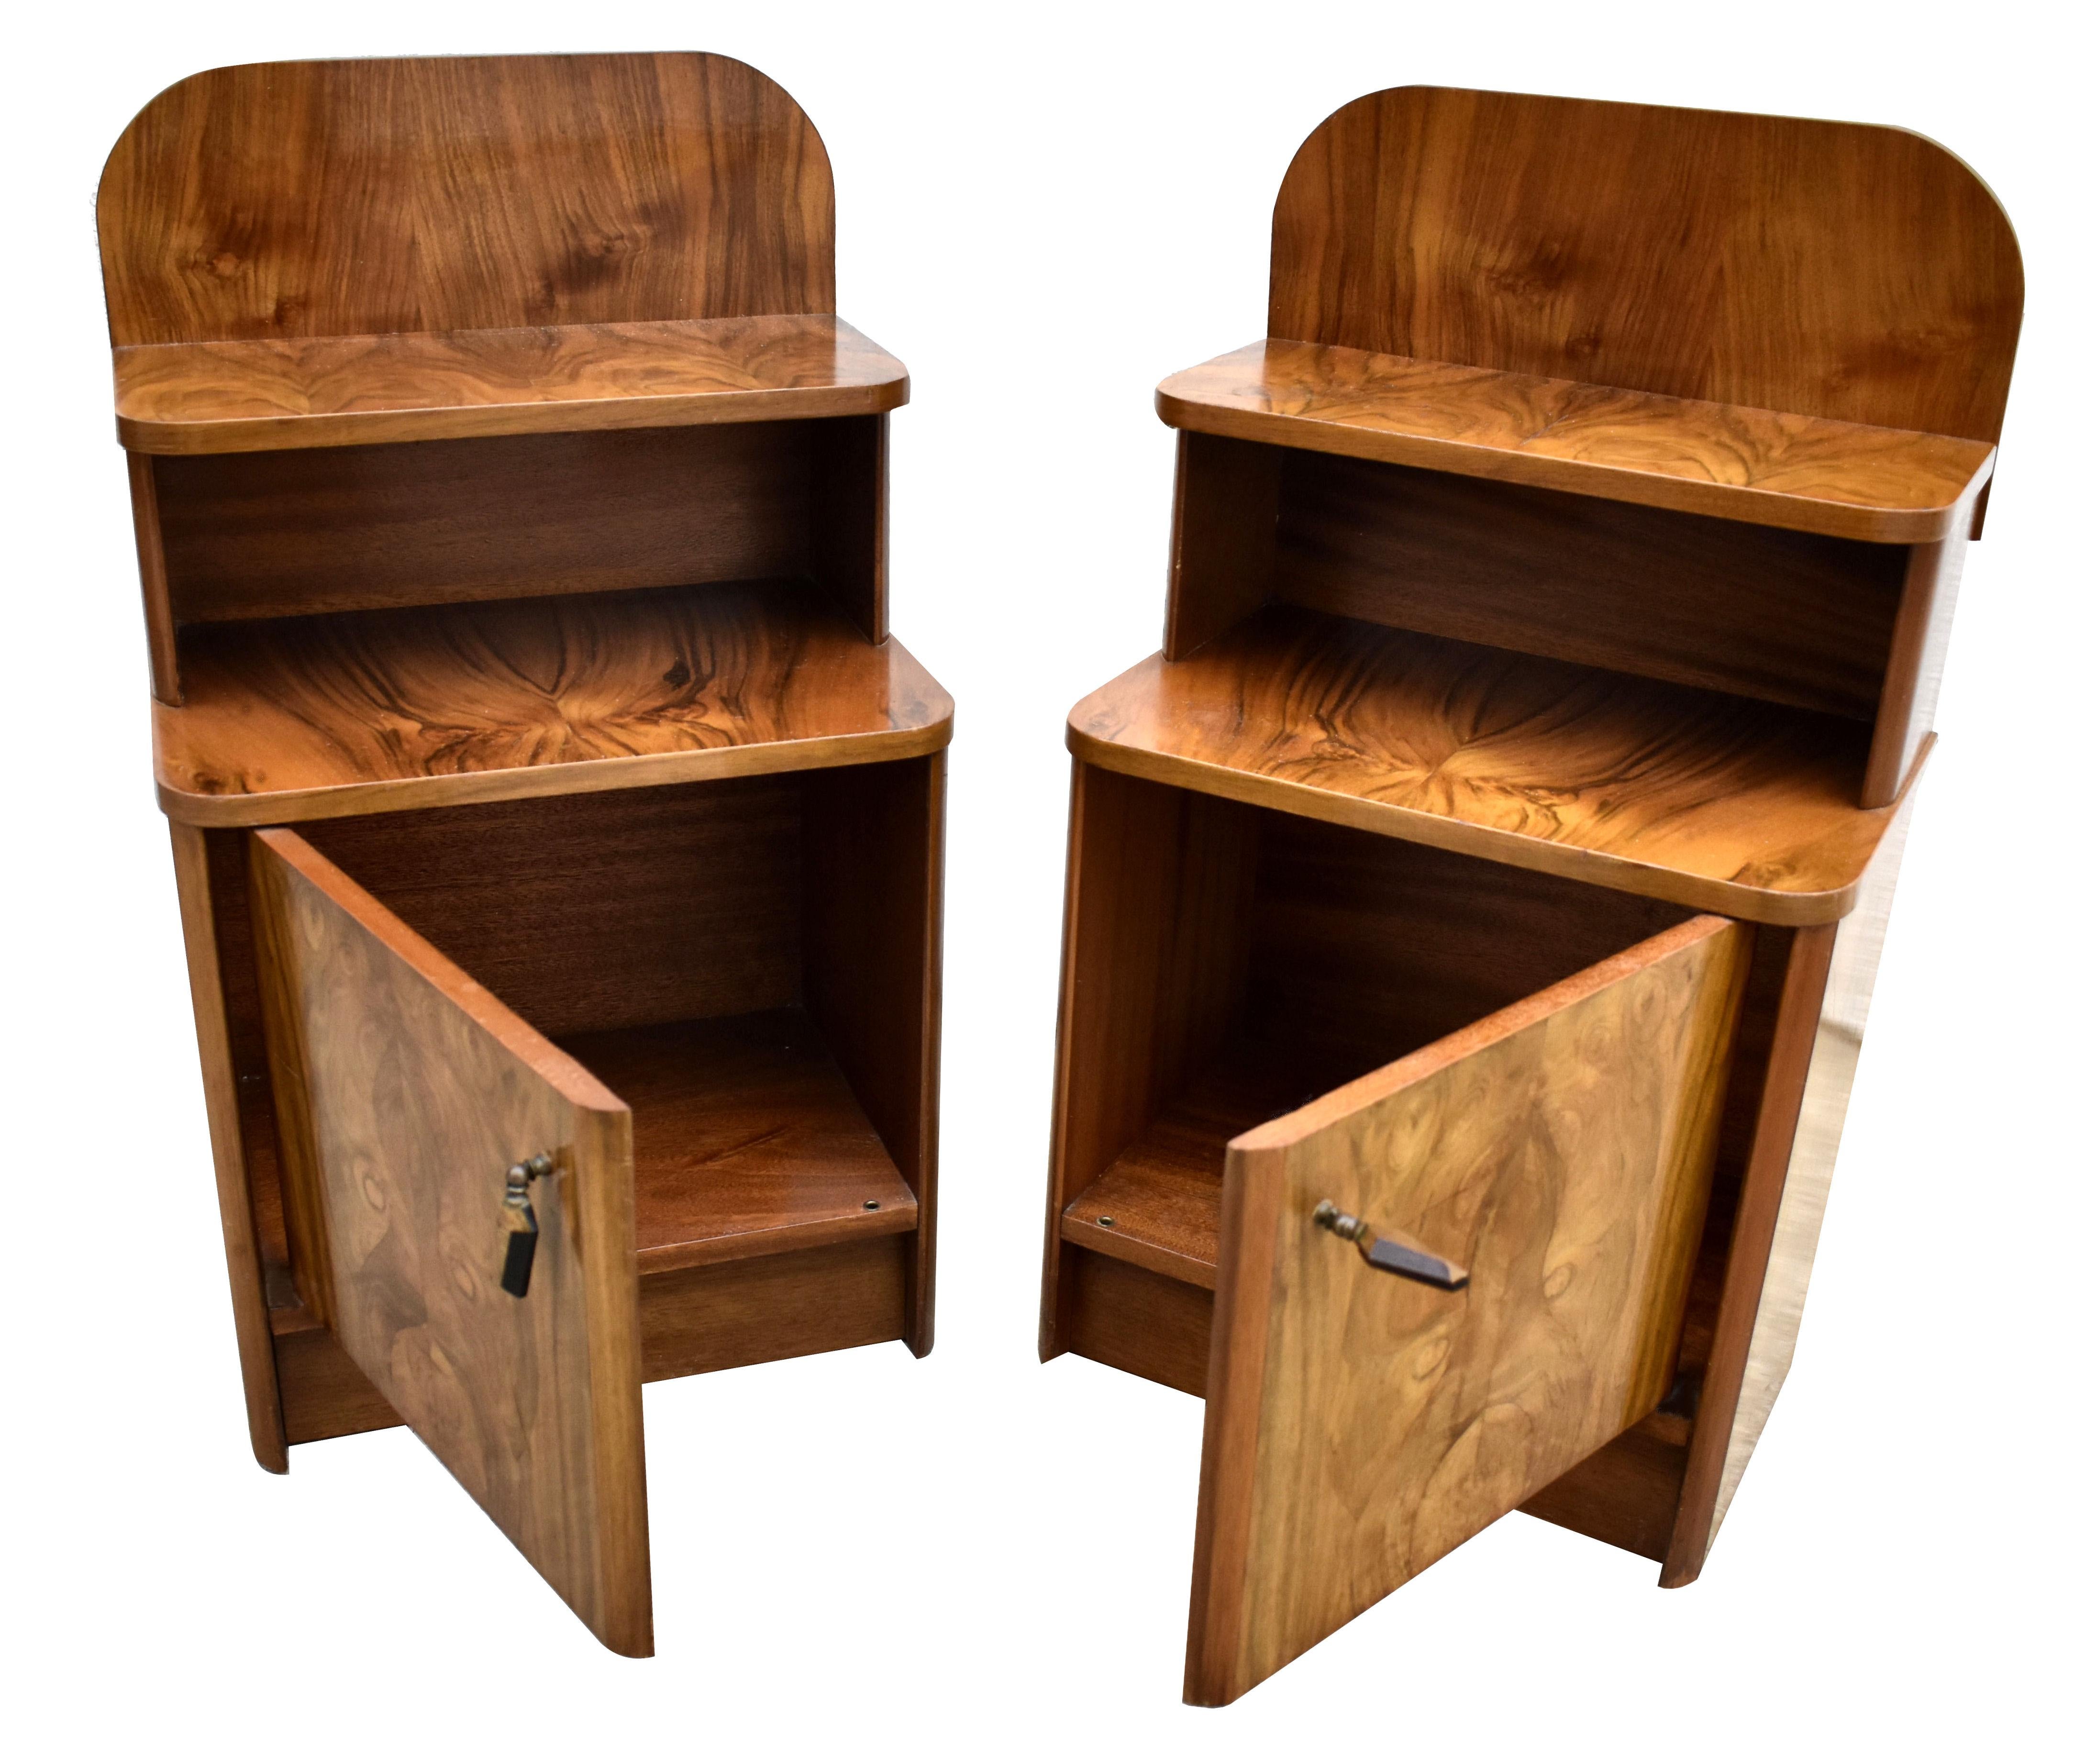 20th Century Art Deco Pair of Nightstands, Bedside Table Cabinets in Walnut, England, c1930 For Sale